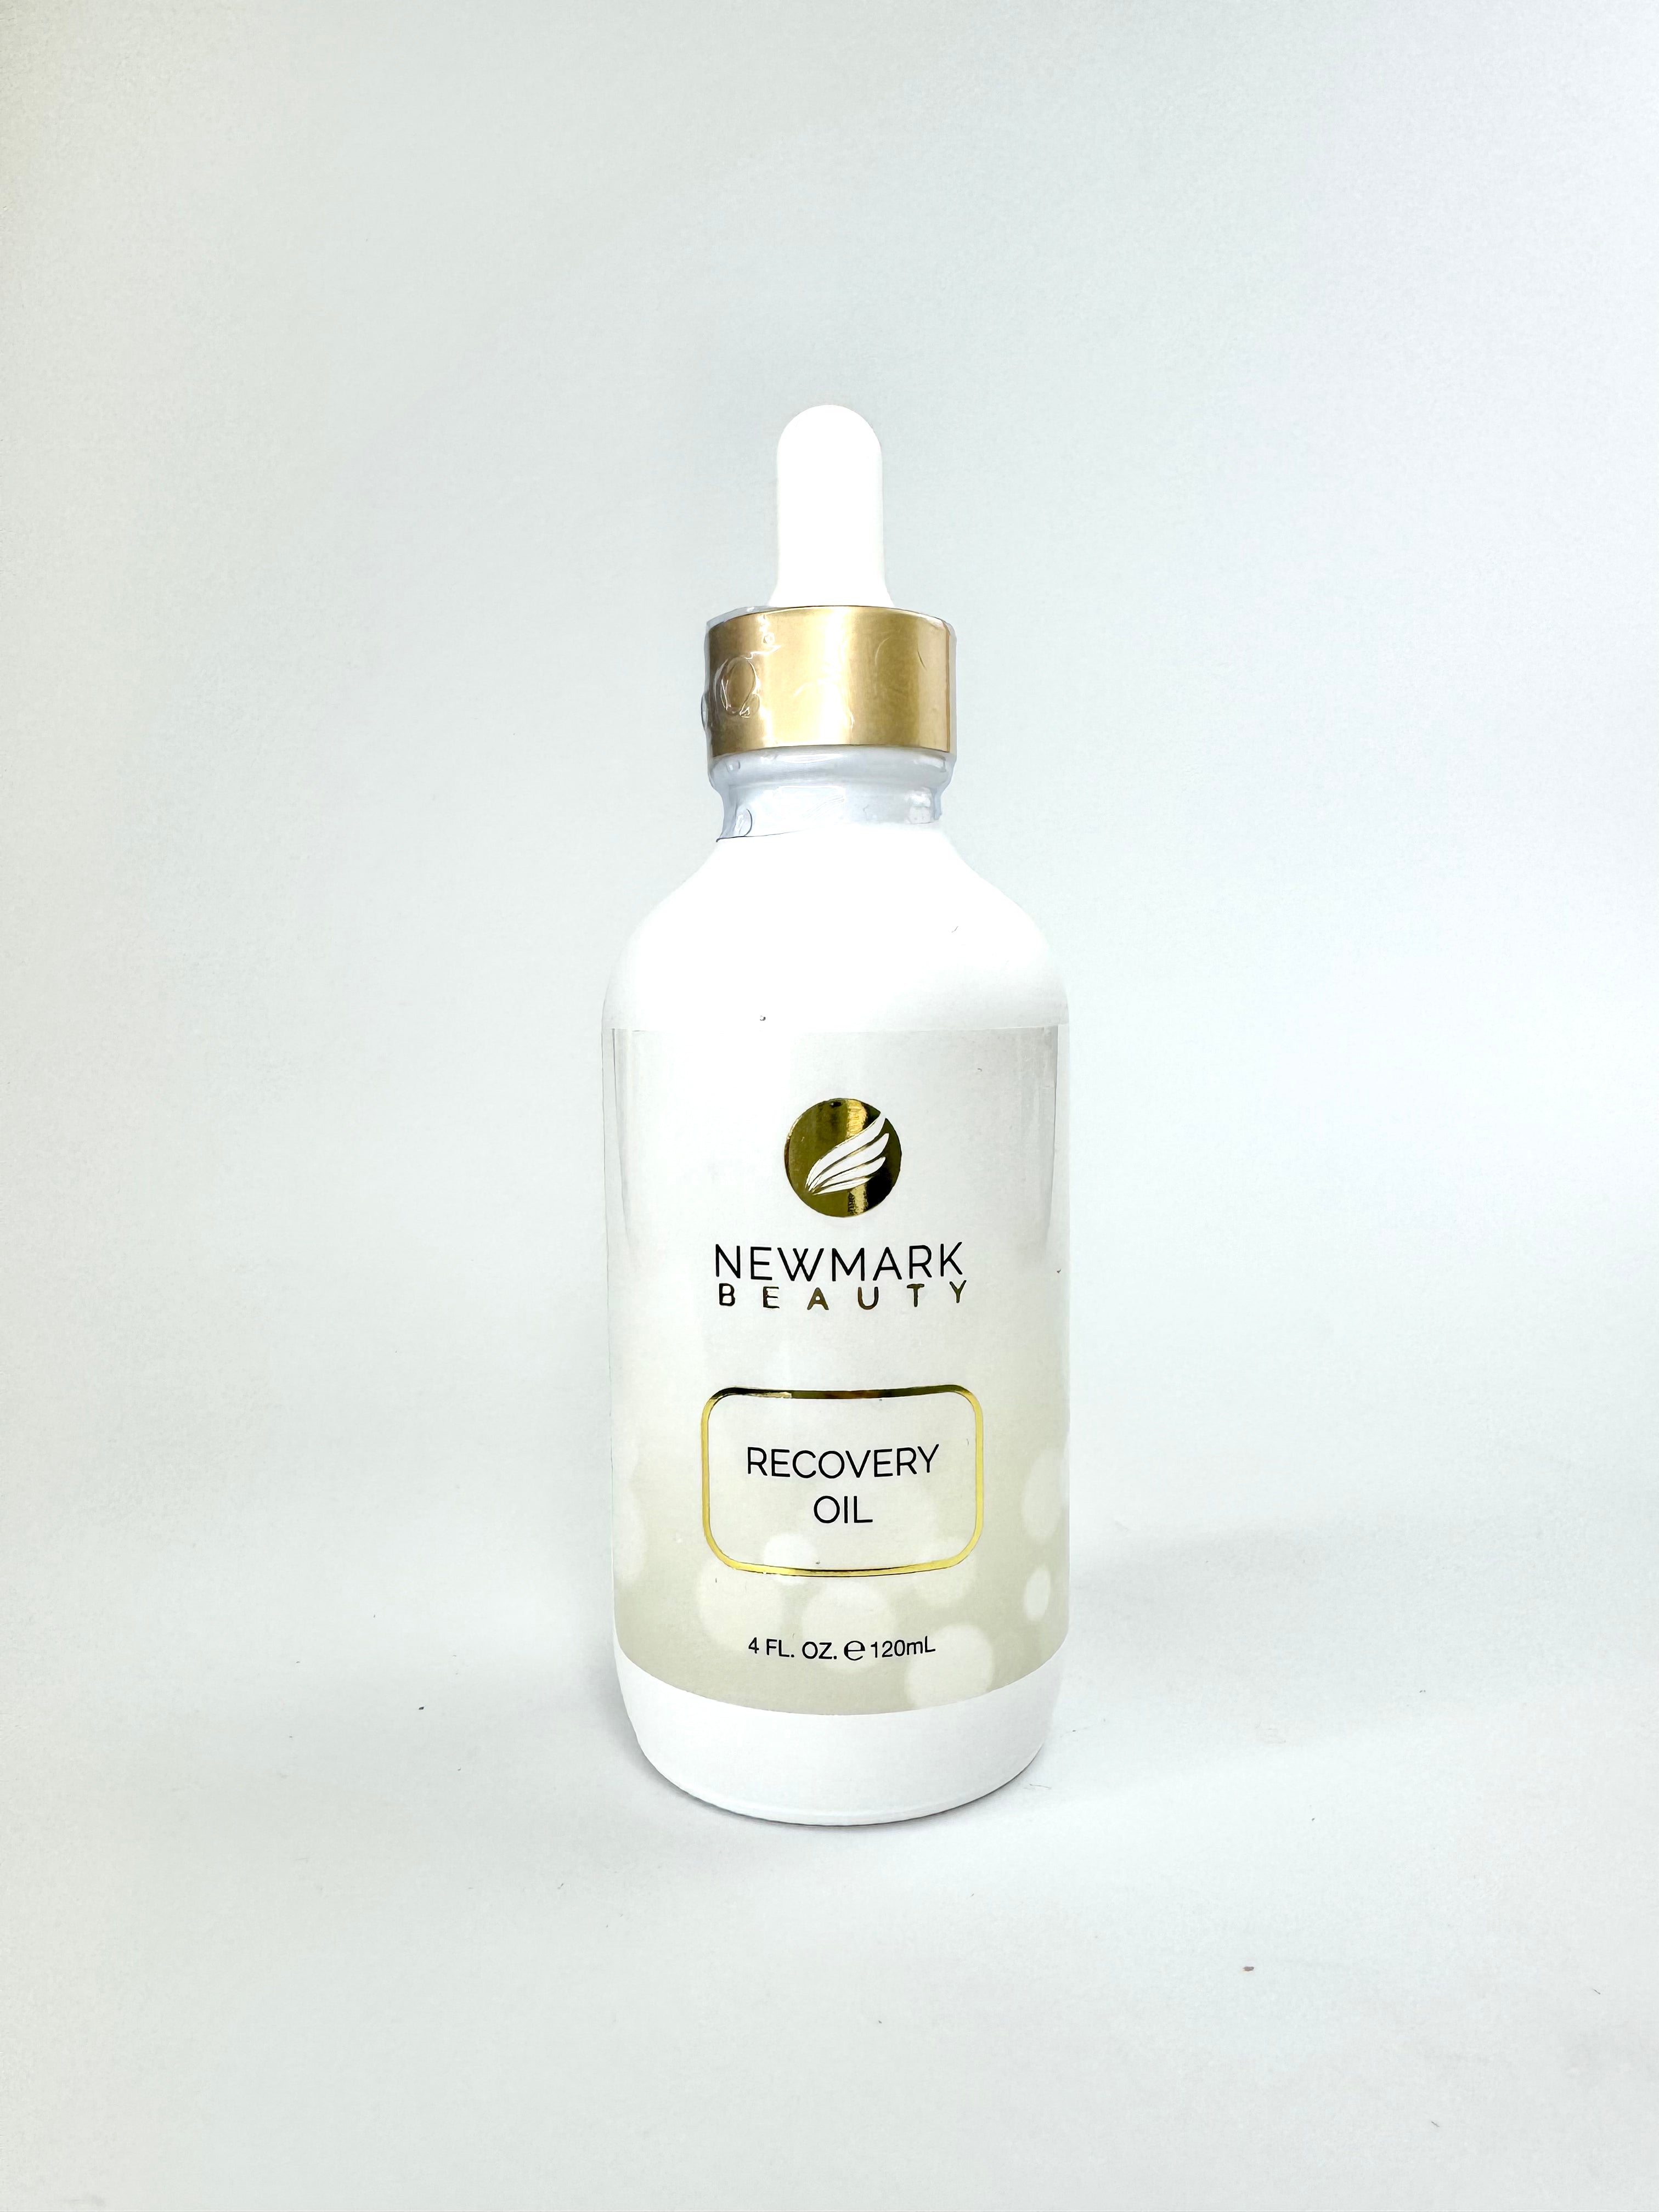 Recovery Oil by Newmark Beauty